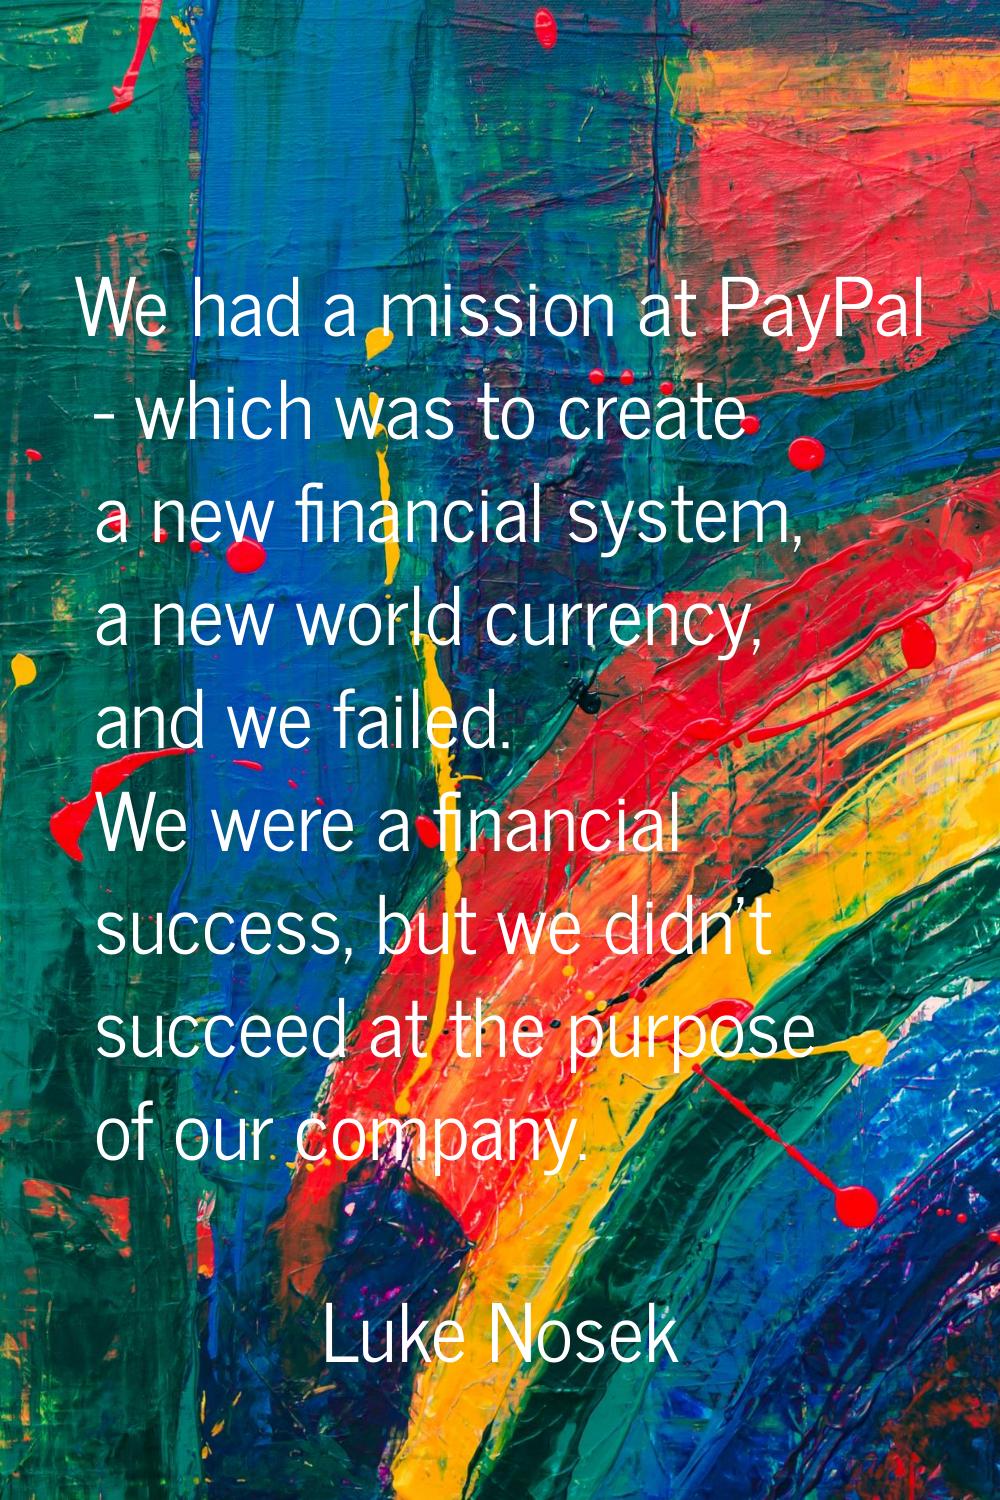 We had a mission at PayPal - which was to create a new financial system, a new world currency, and 